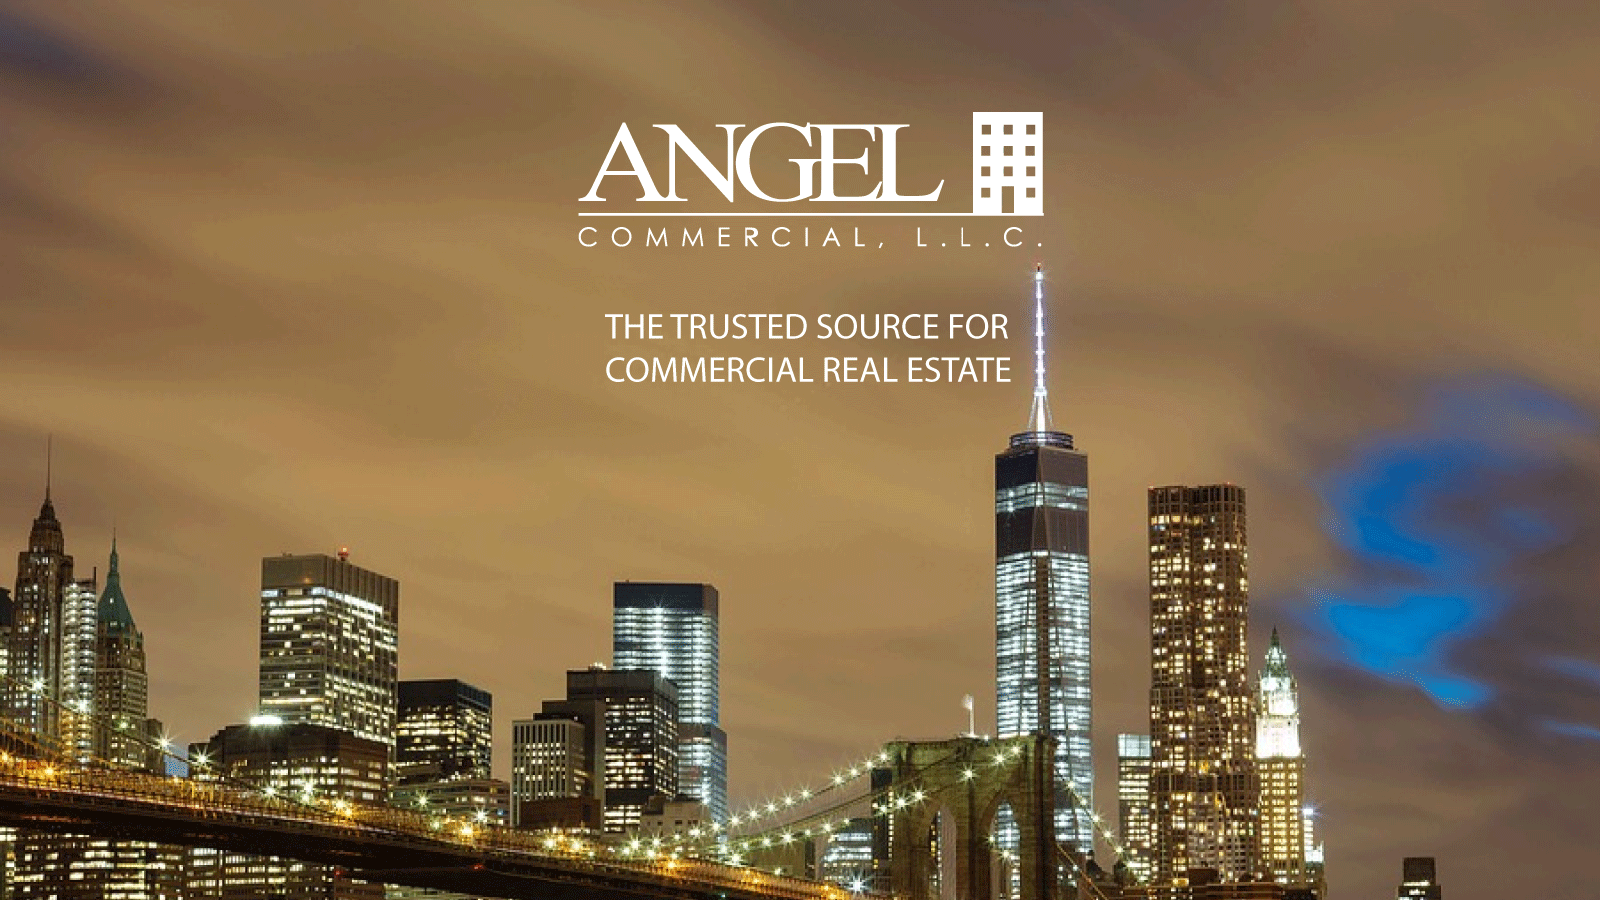 Angel Commercial, LLC - Award Winning Commercial Real Estate Firm